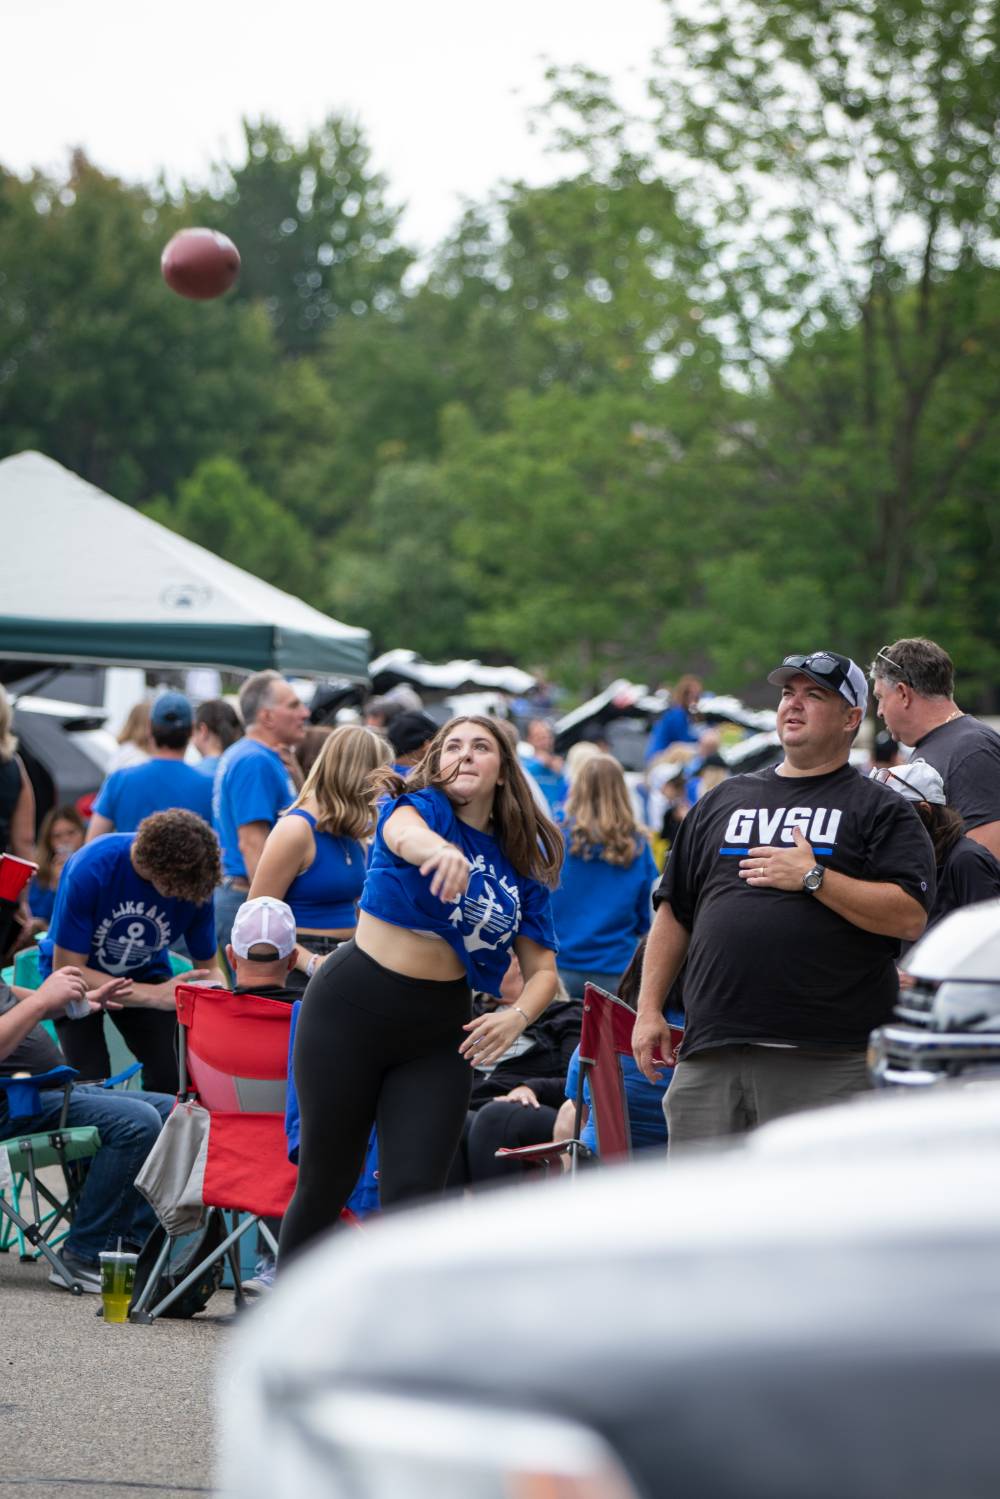 Attendee throws football in parking lot during Family Day tailgate.